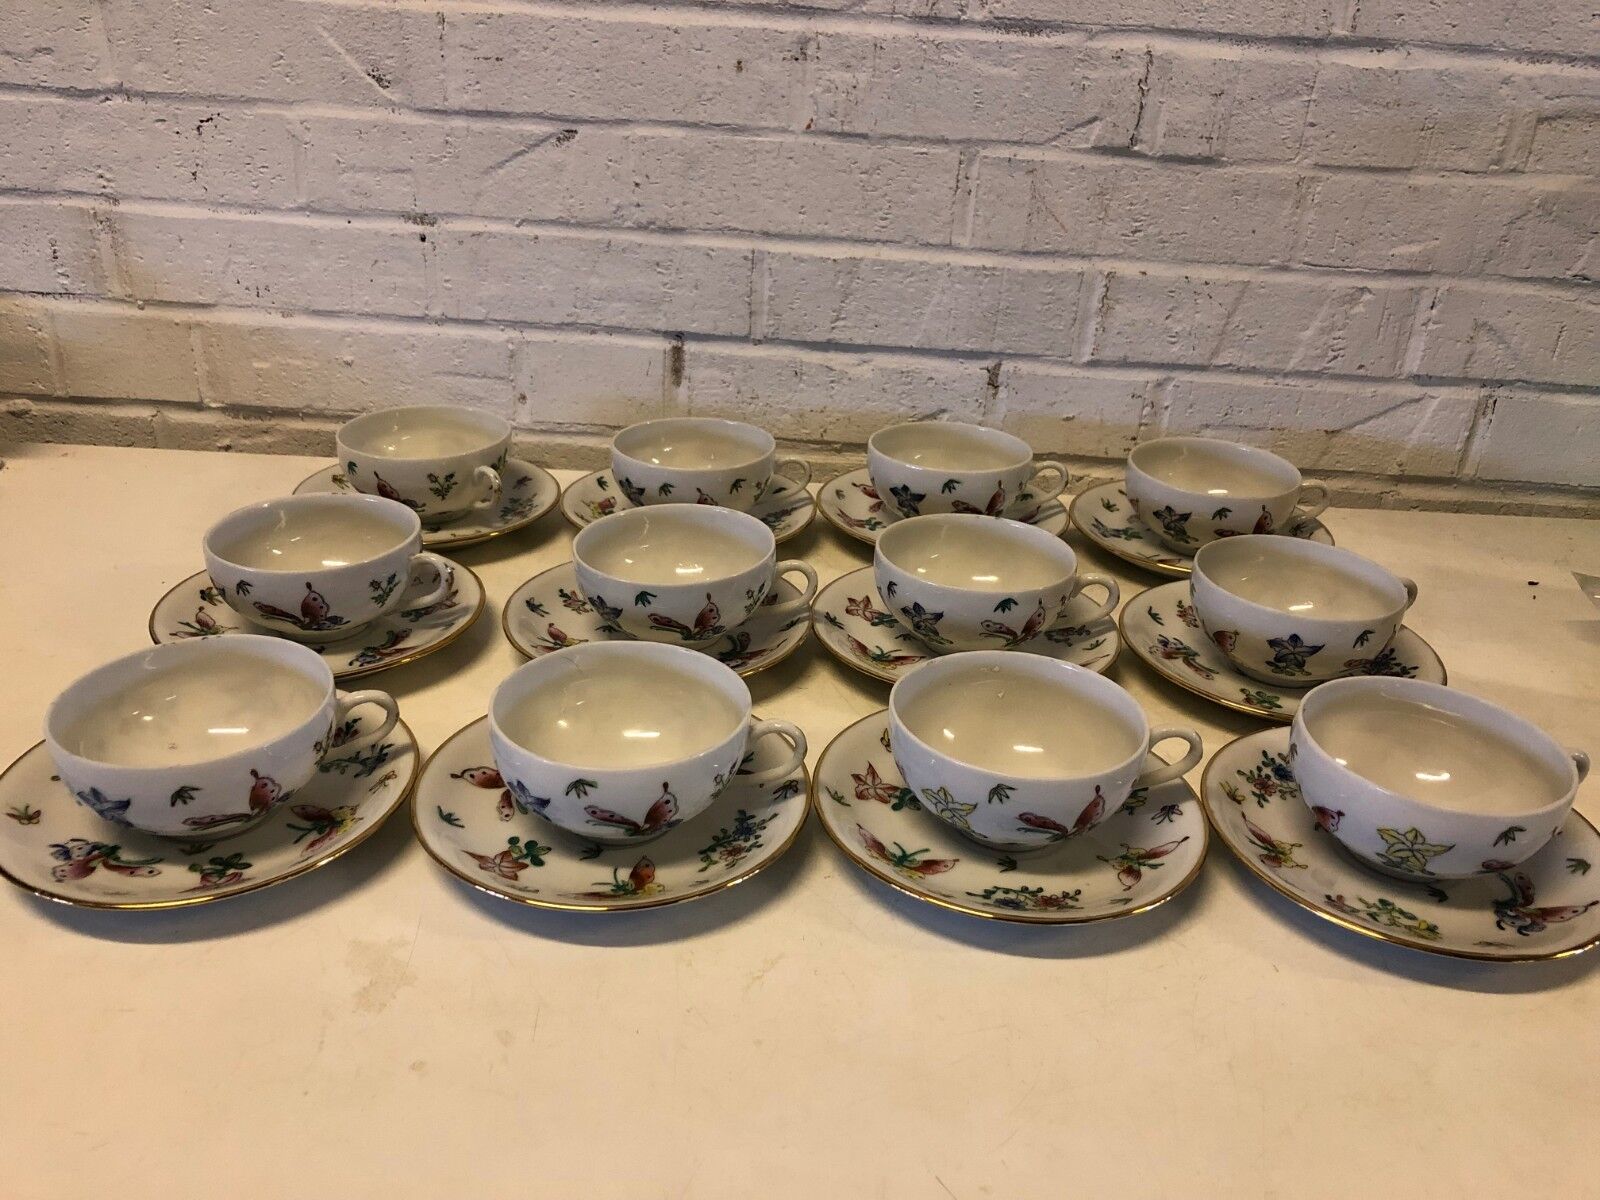 Antique Asian Porcelain Set of 12 Cups and Saucers with Hand Painted Floral Dec.